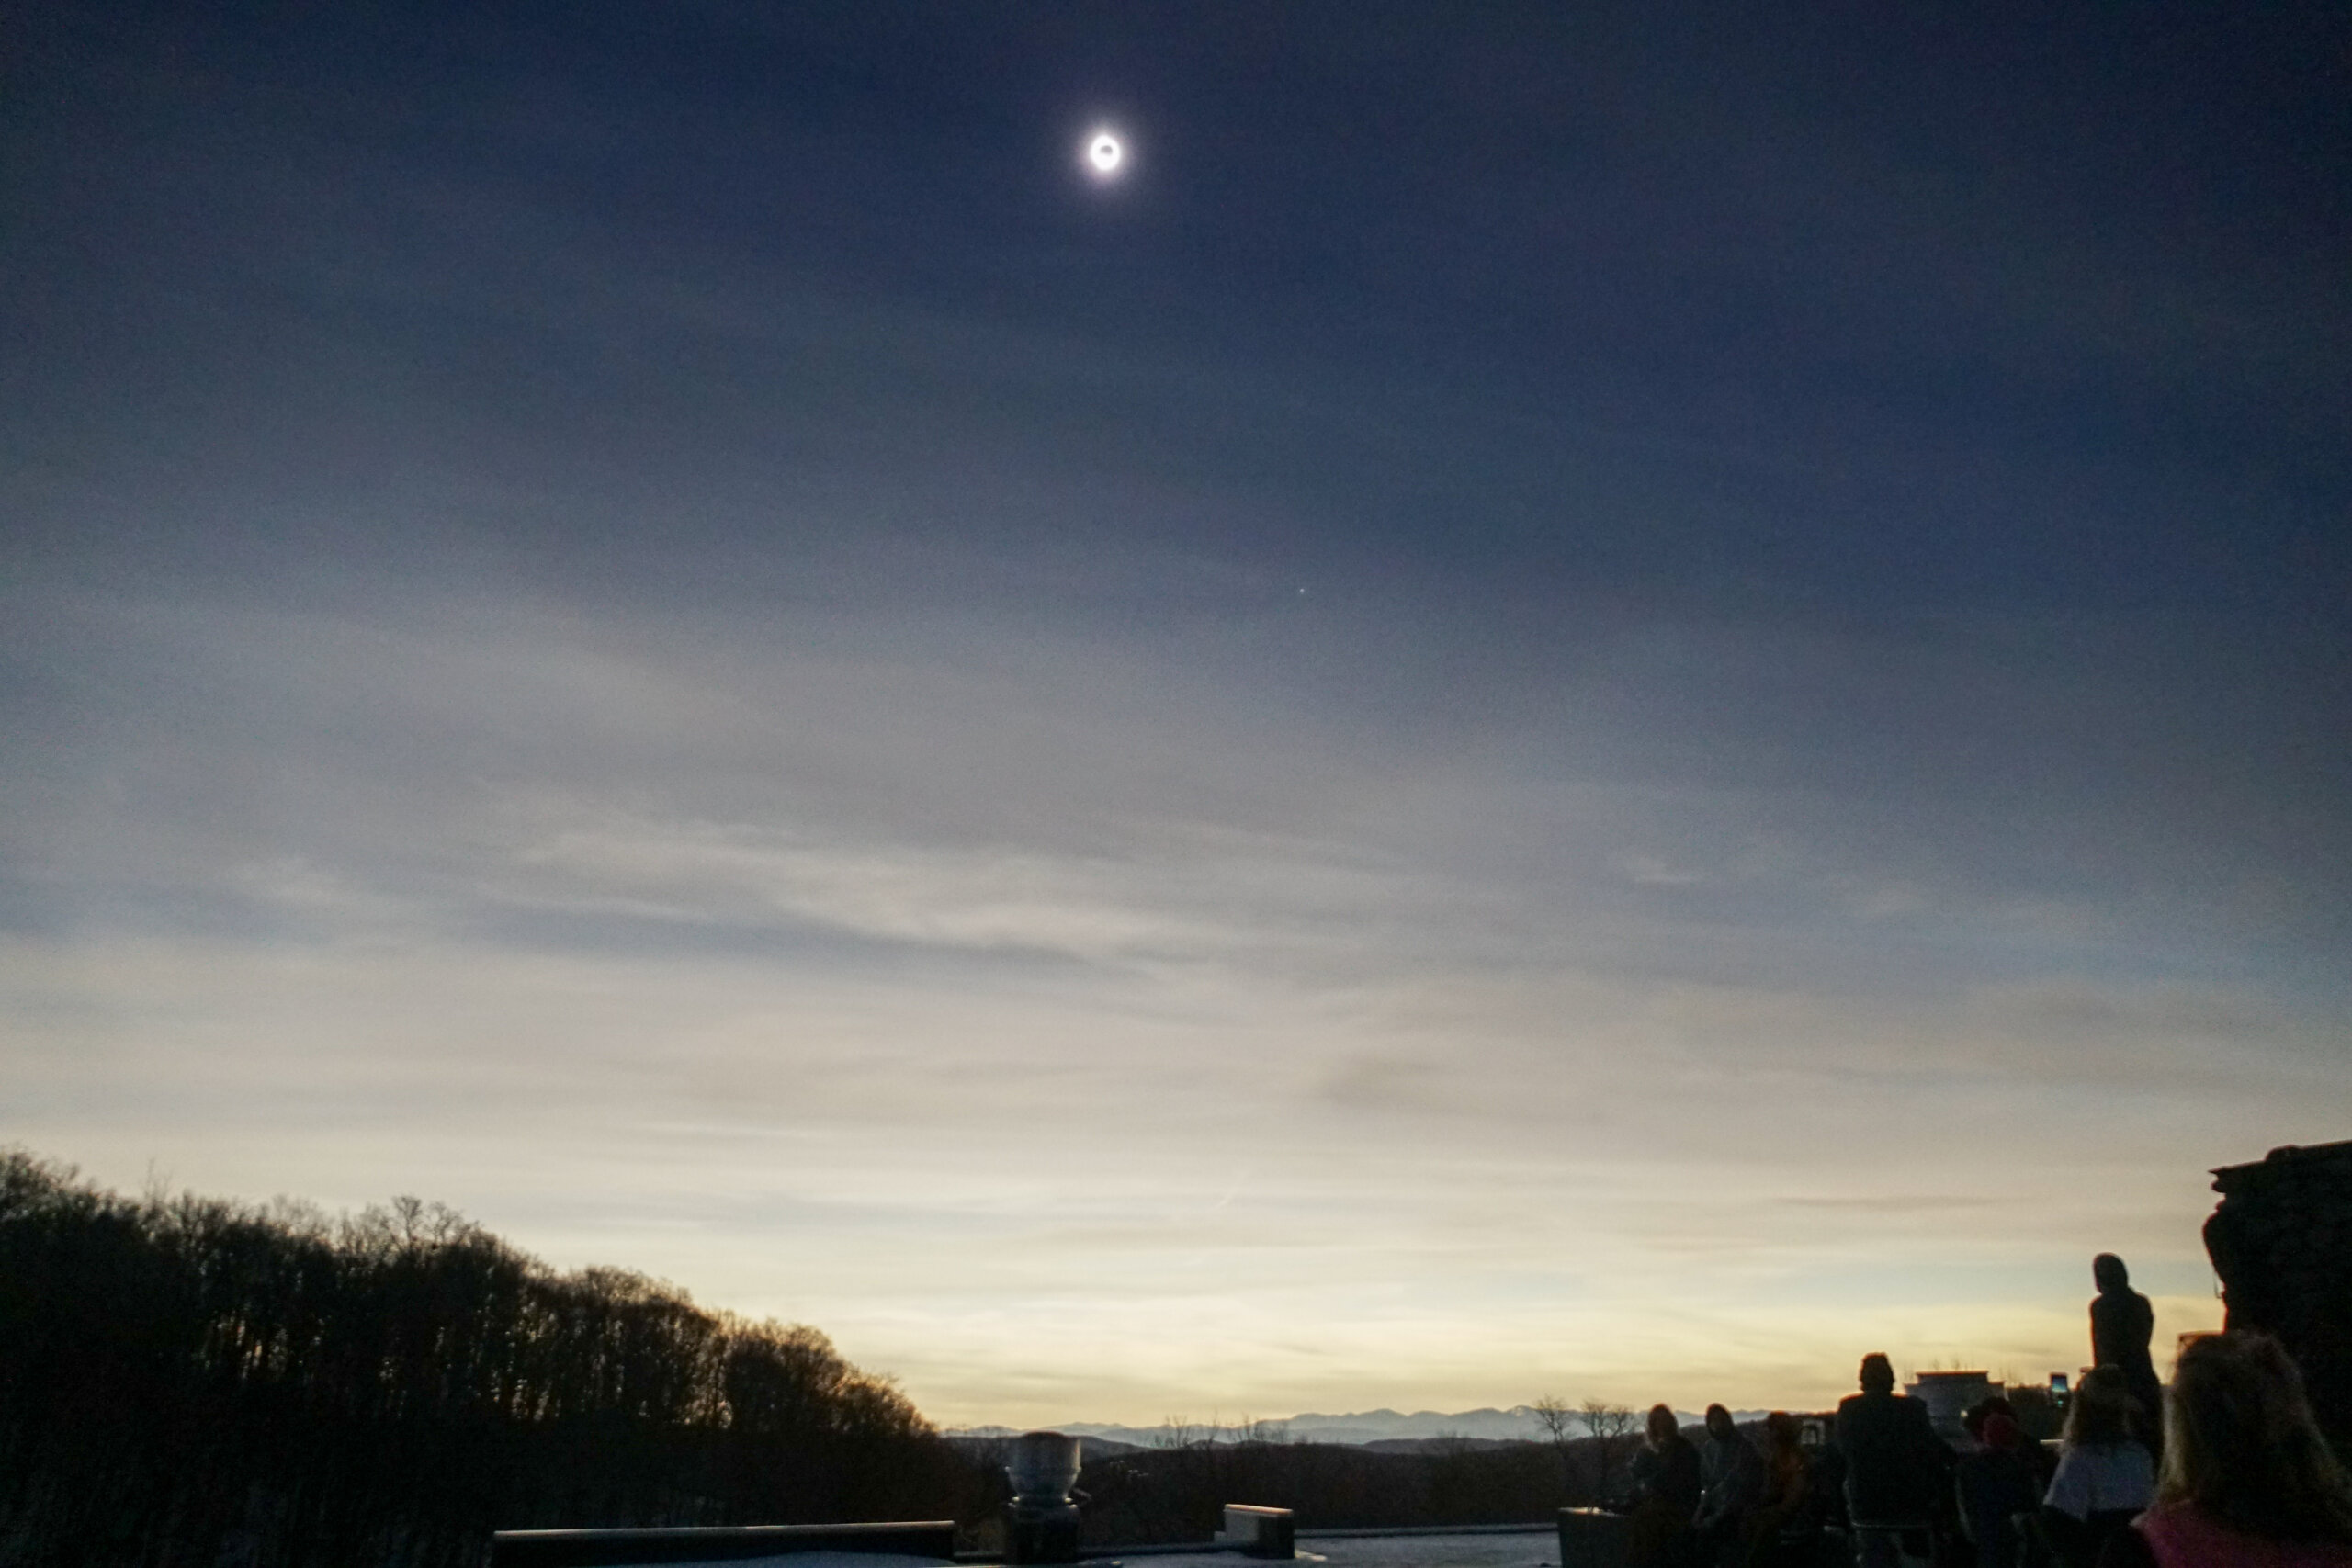 photograph of the total solar eclipse taken from the roof of bolton valley